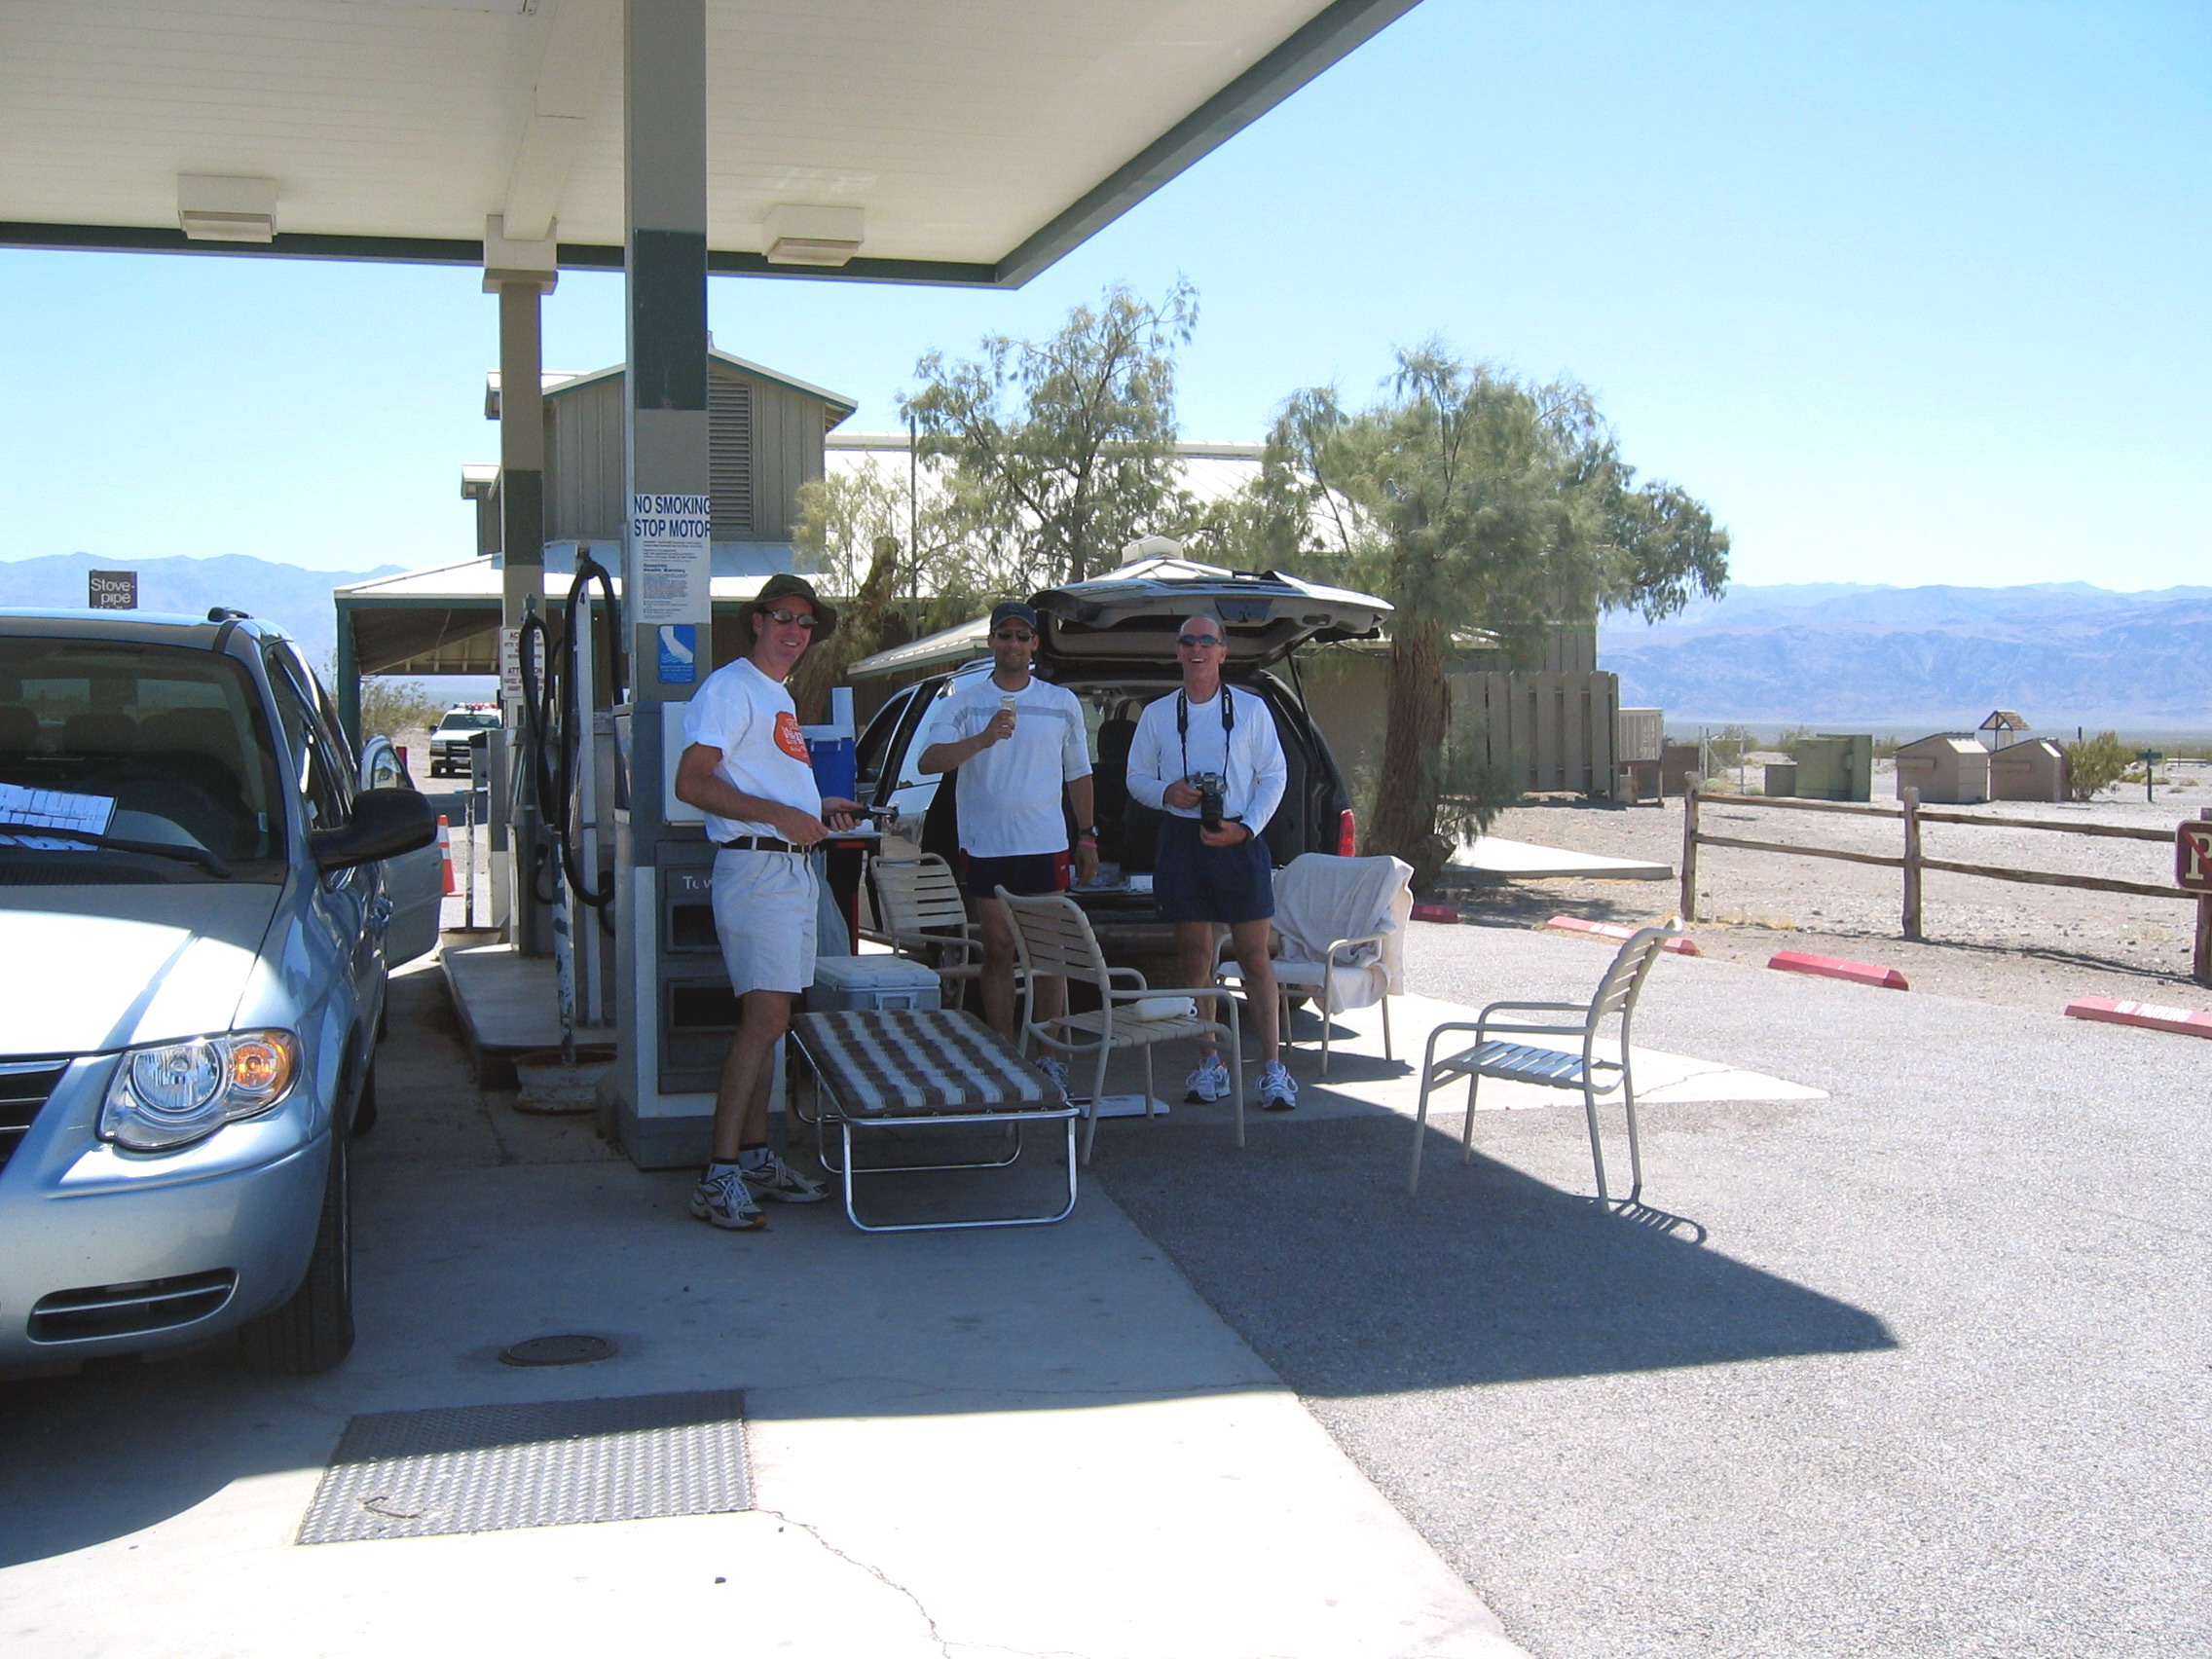 The researchers are set up in the shade at the gas station at SPW, which does not have gas this year